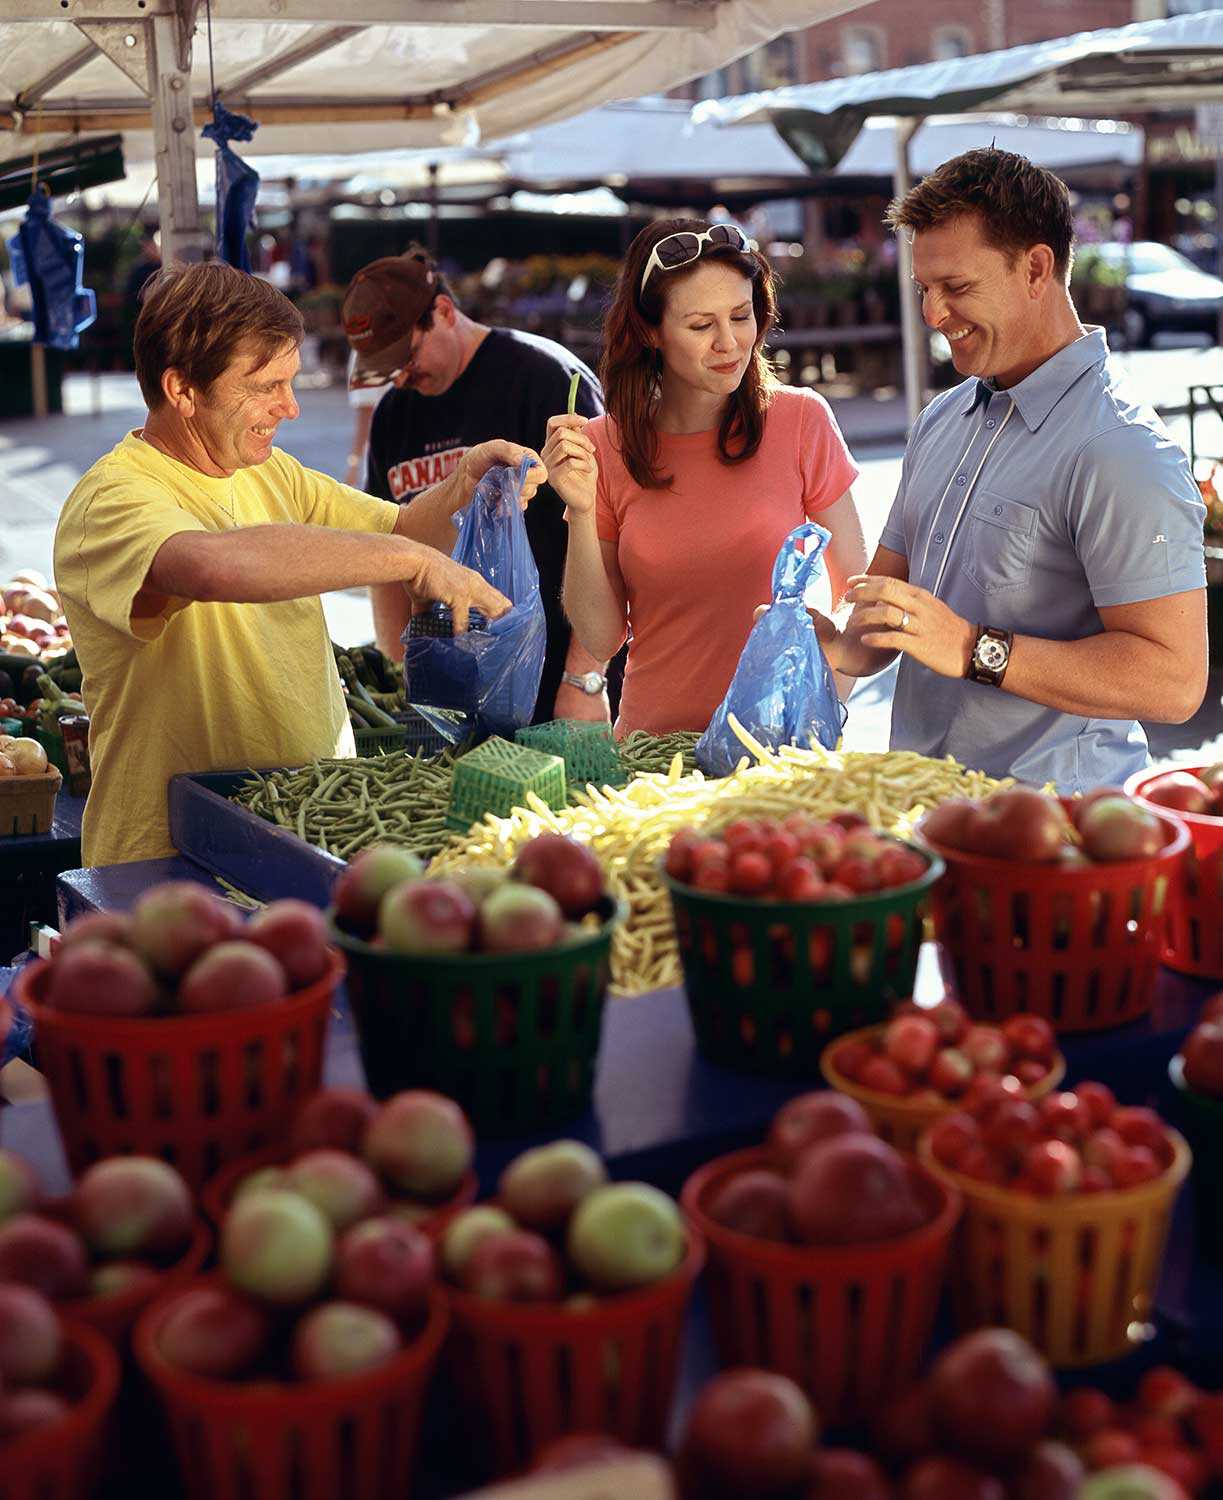 Increasingly, people are becoming more aware of not just what they eat, but where their food originates. © Ontario Tourism 2009